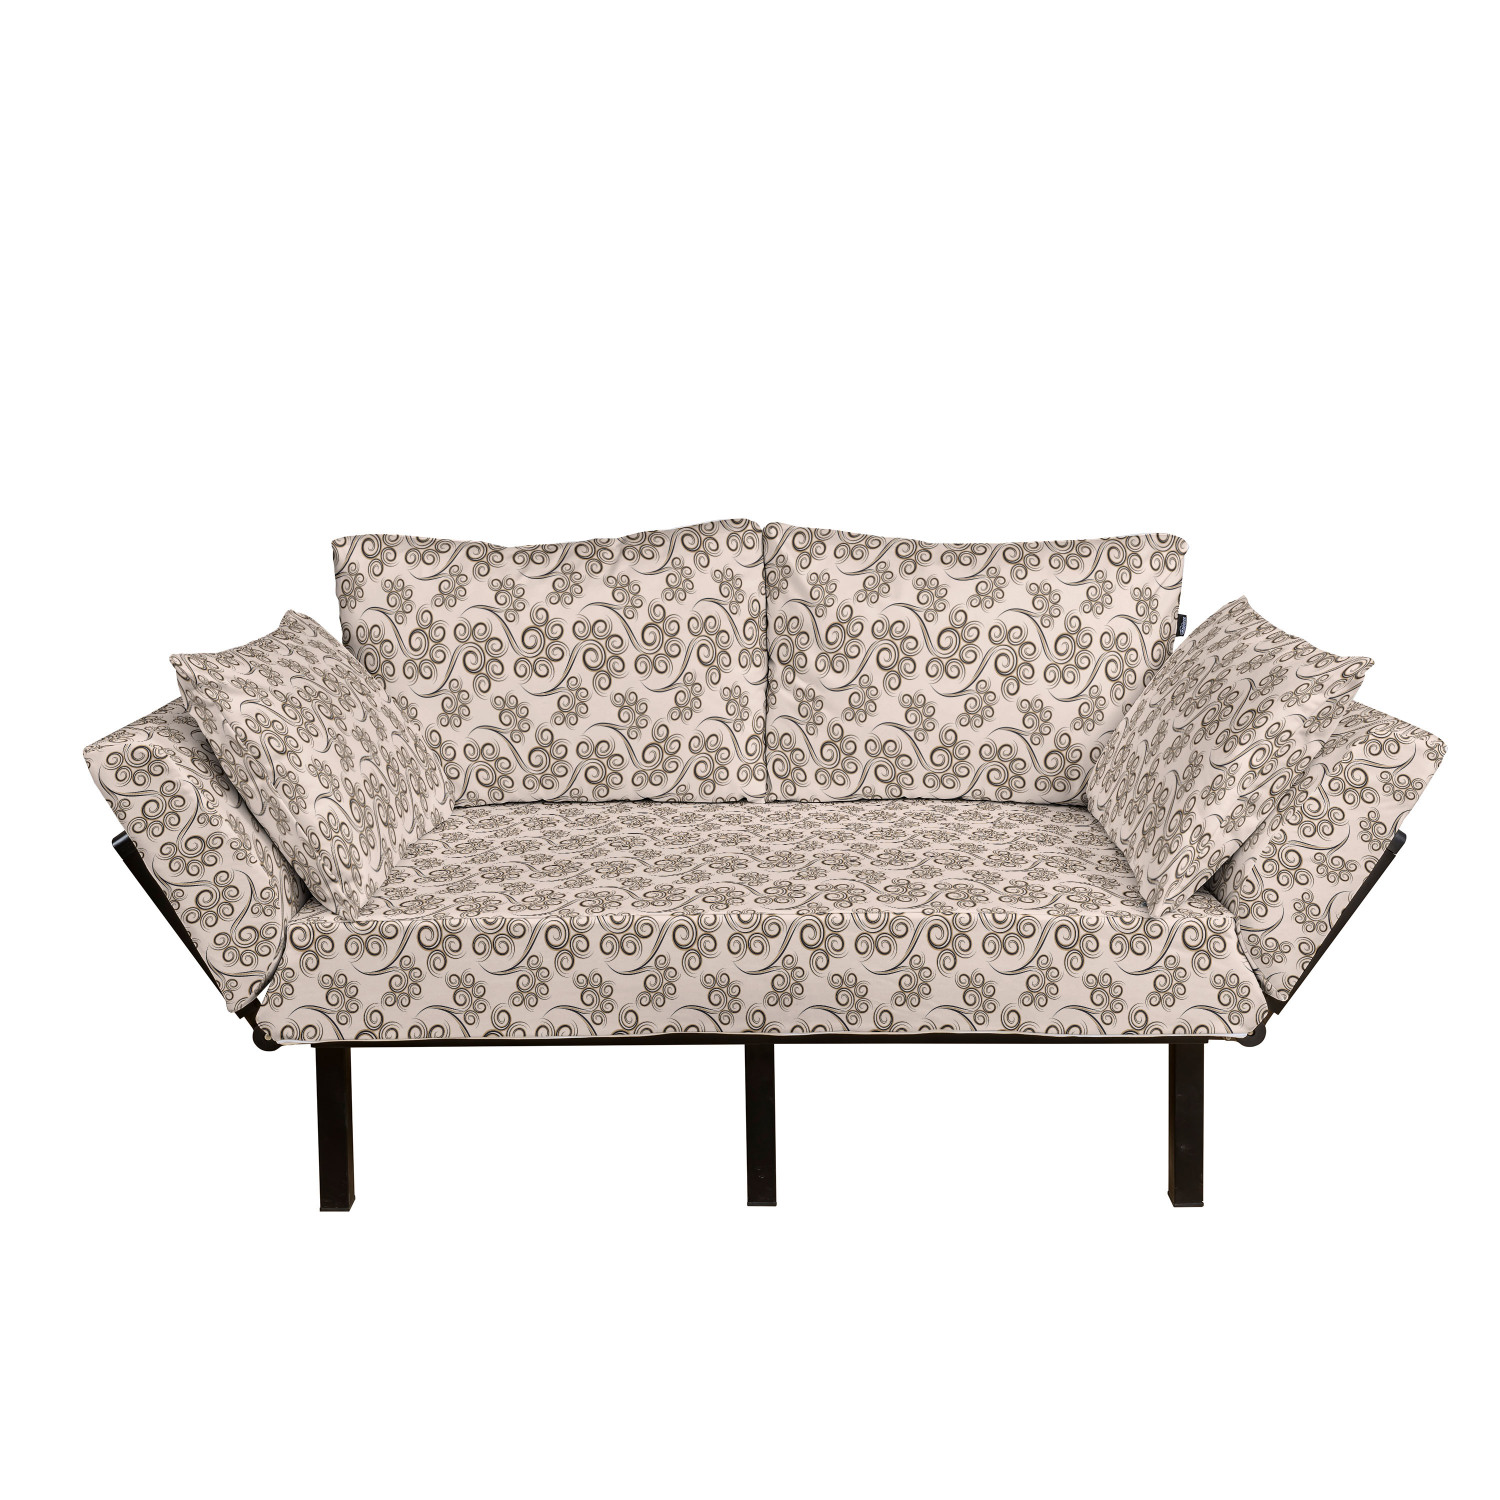 Rose Bouquets Flourish Romantic Branches Botanic Petals Anniversary Daybed with Metal Frame Upholstered Sofa for Living Dorm Ambesonne Floral Futon Couch Loveseat Coconut and Dark Blue Grey